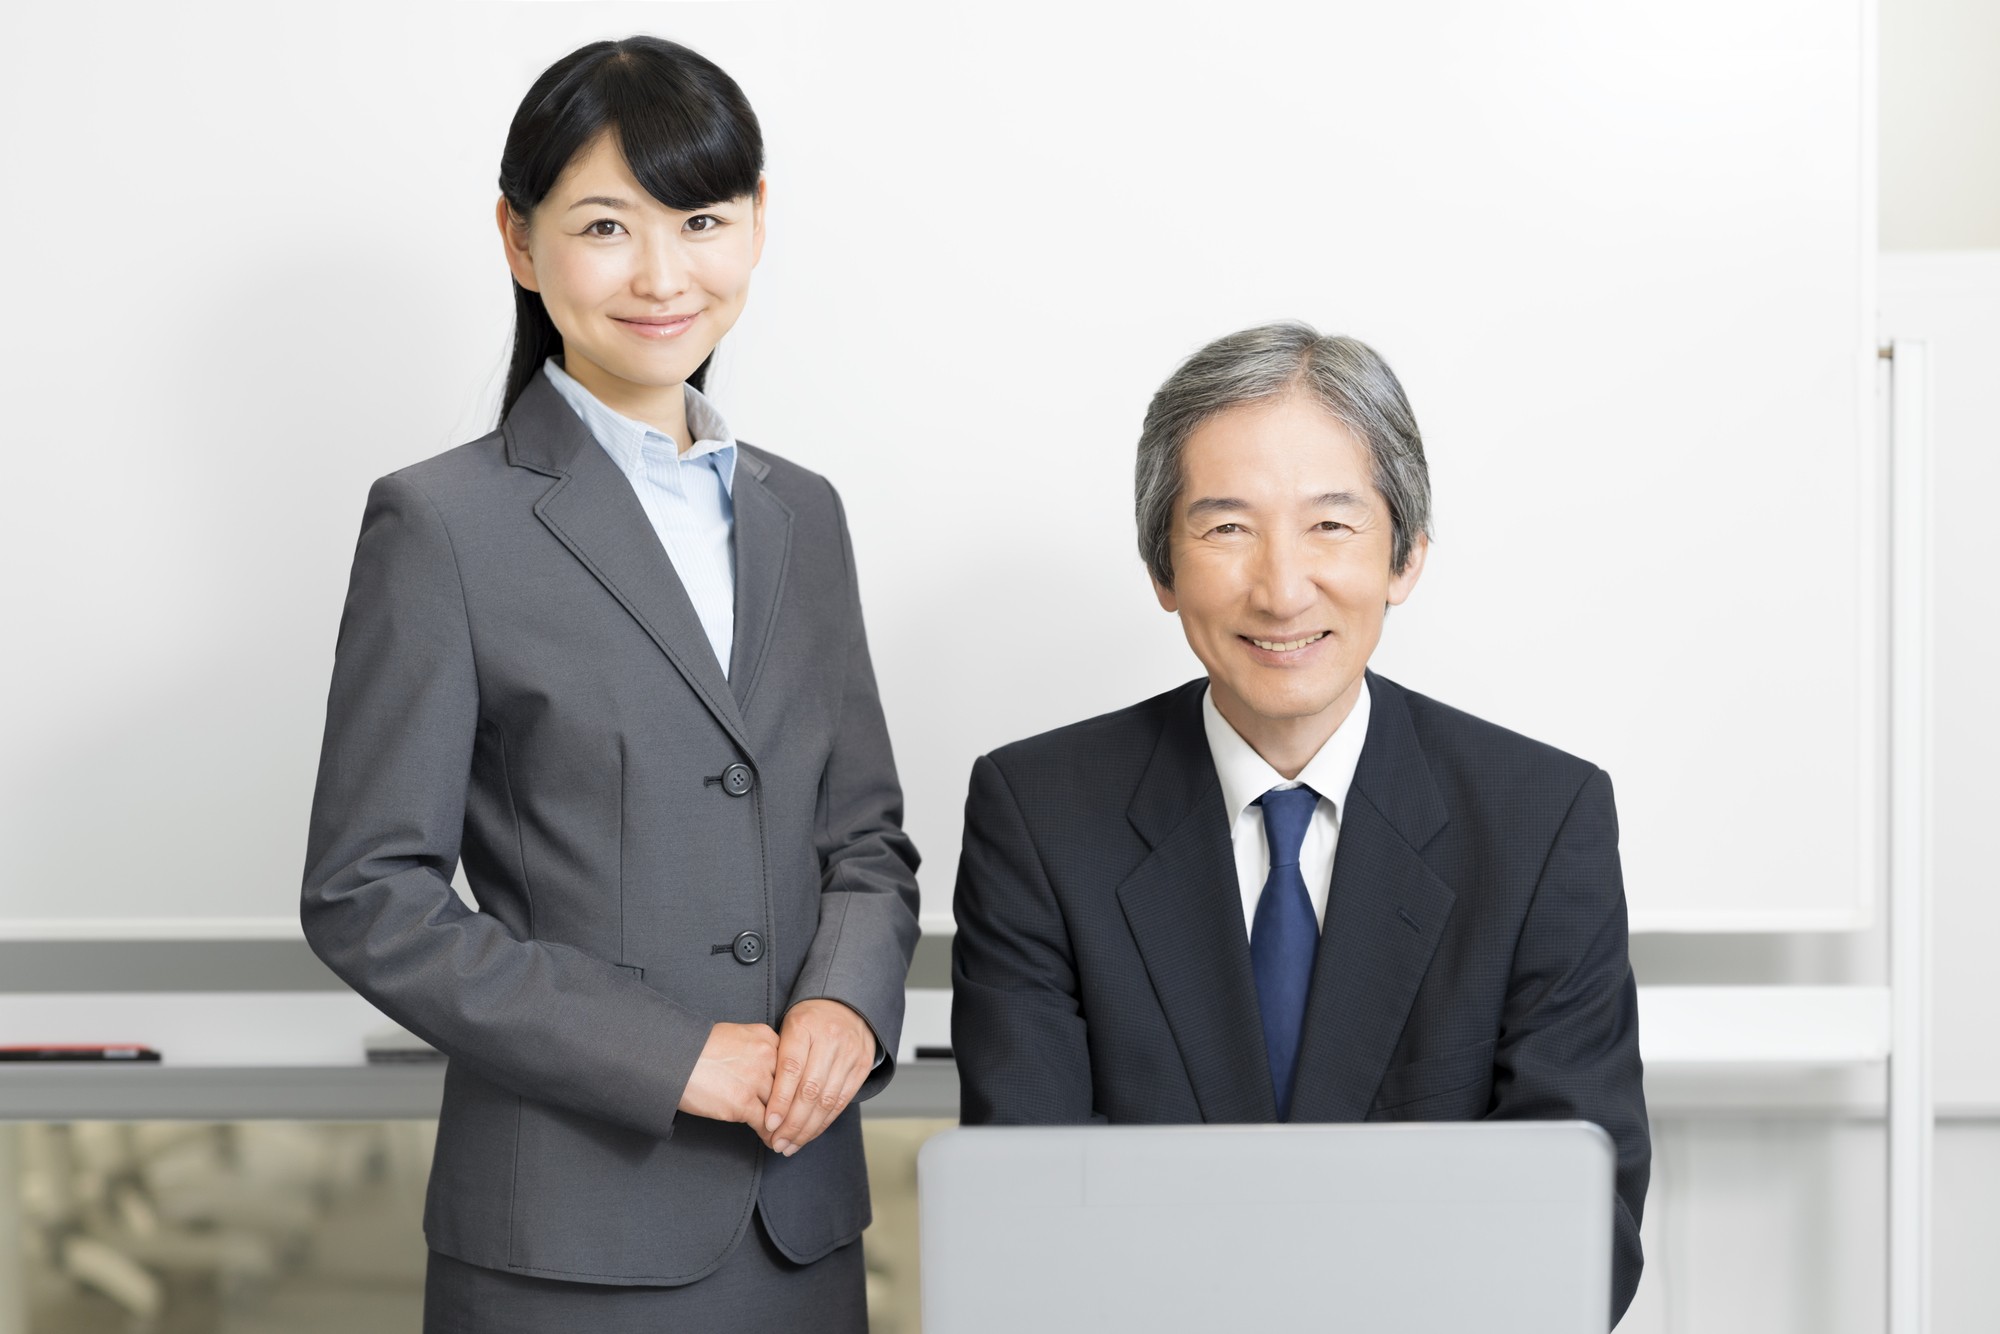 ■ If you can do this, you will be a full-fledged person! How to become a professional secretary?